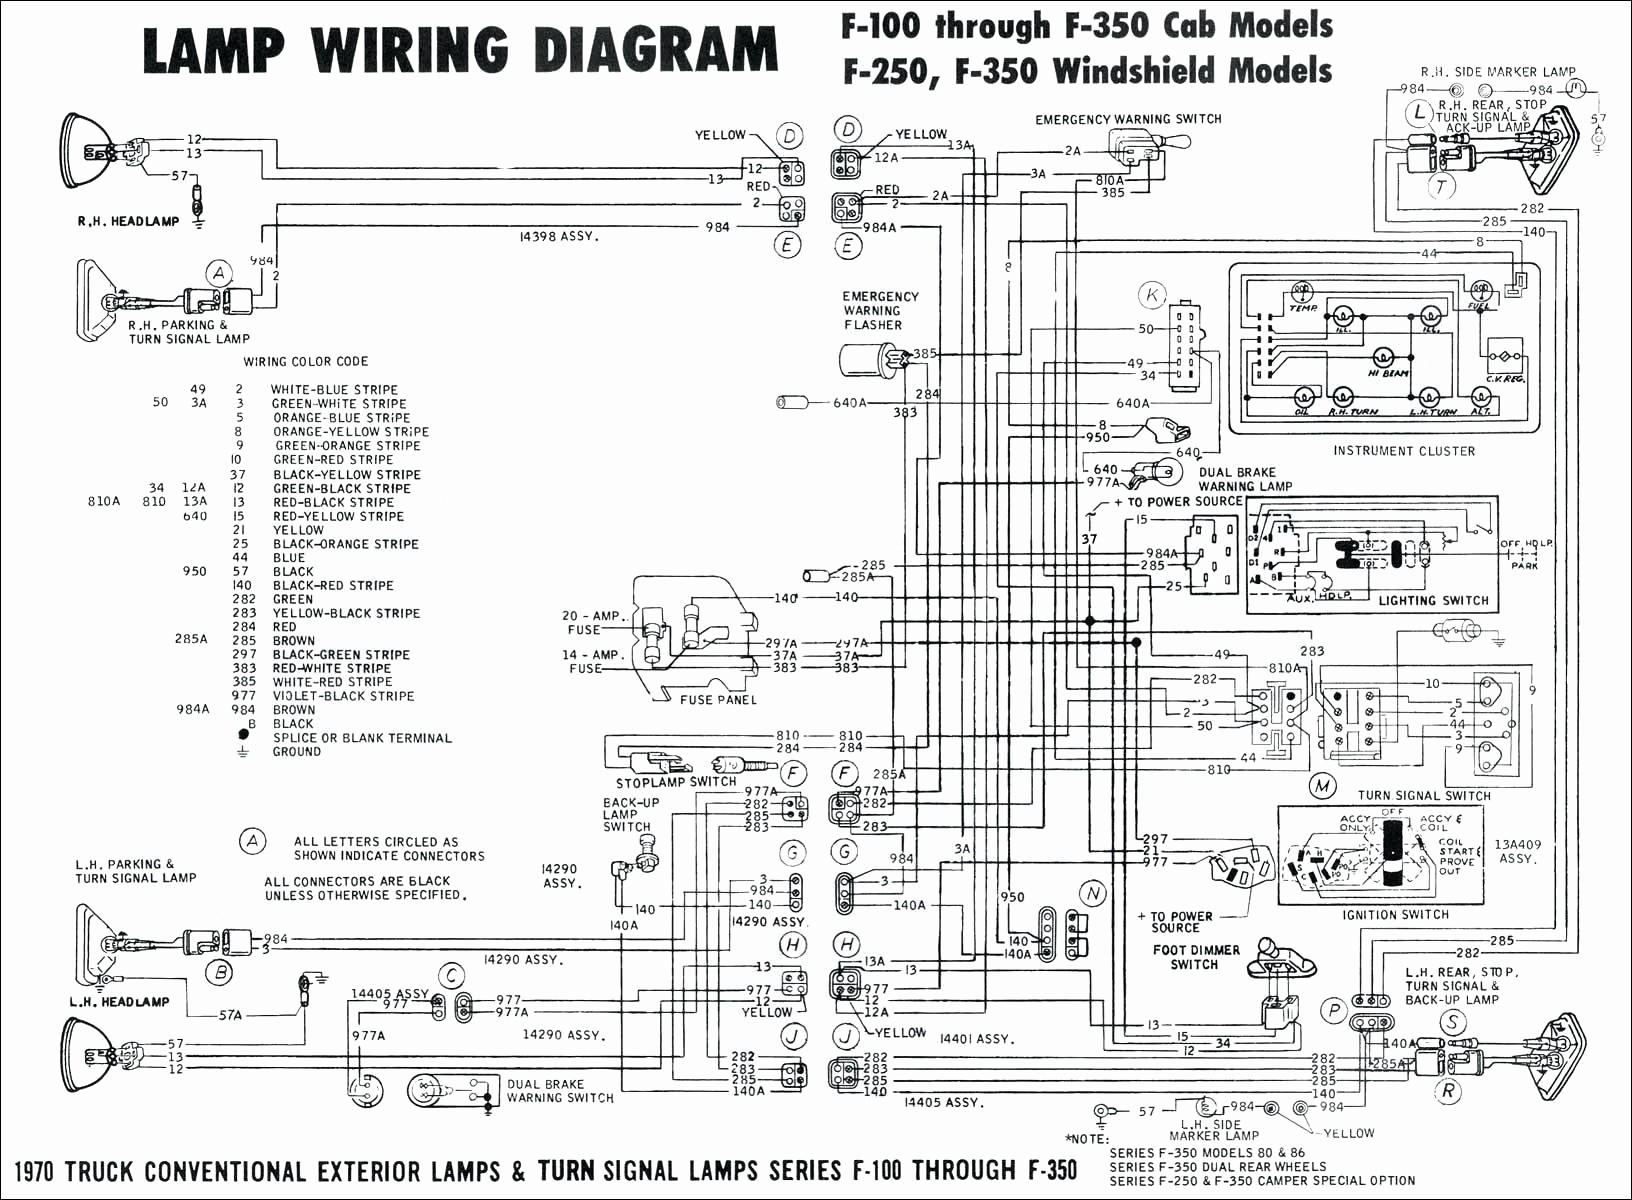 Signal Wiring Diagram Turn Related Post